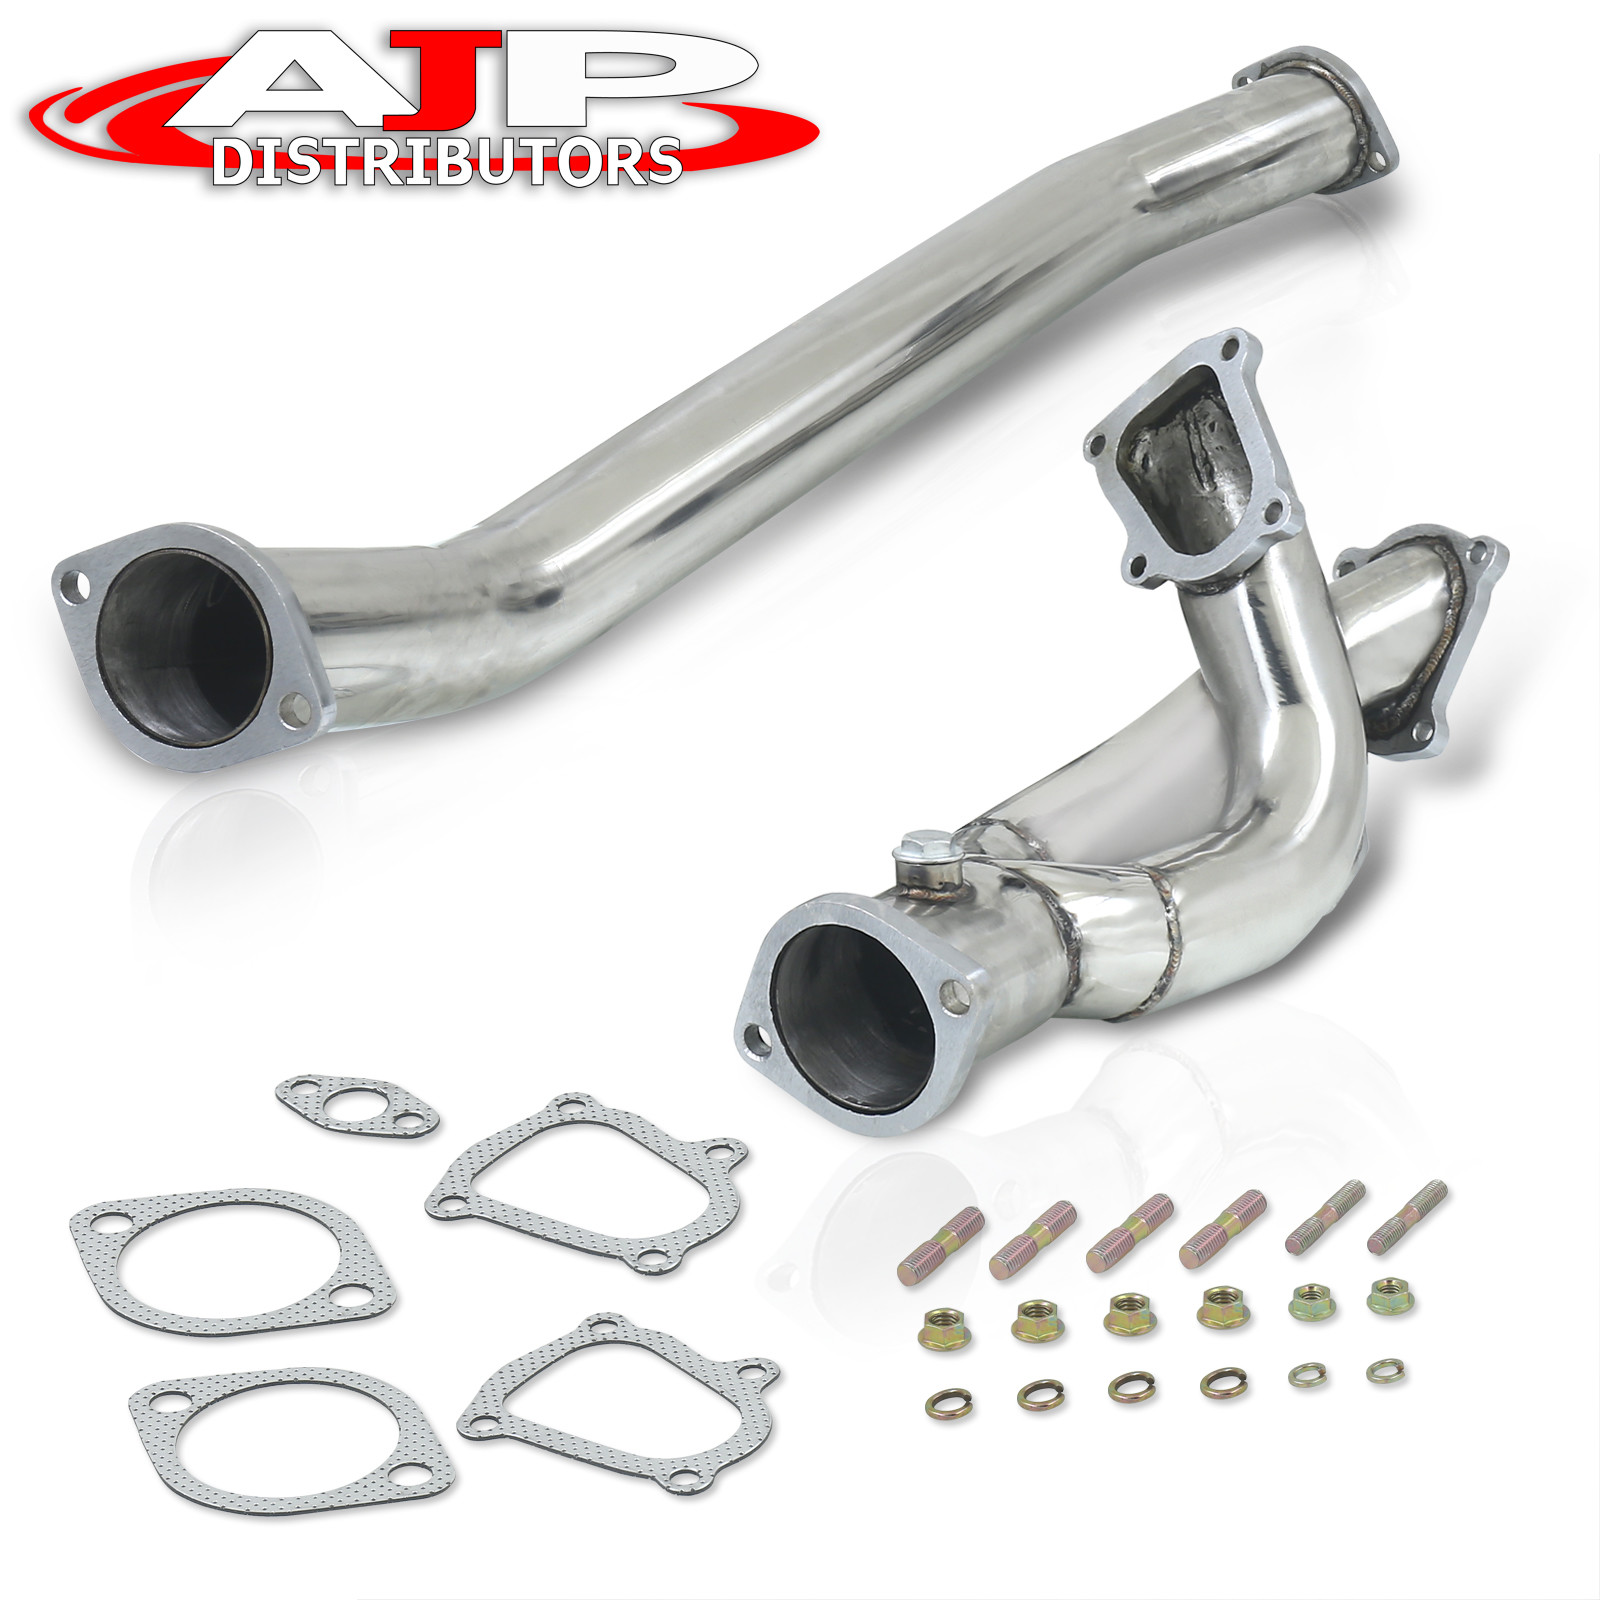 JDM Stainless Twin Turbo Racing Exhaust Down Mid Pipe For 1986-1992 Supra 1JZGTE 